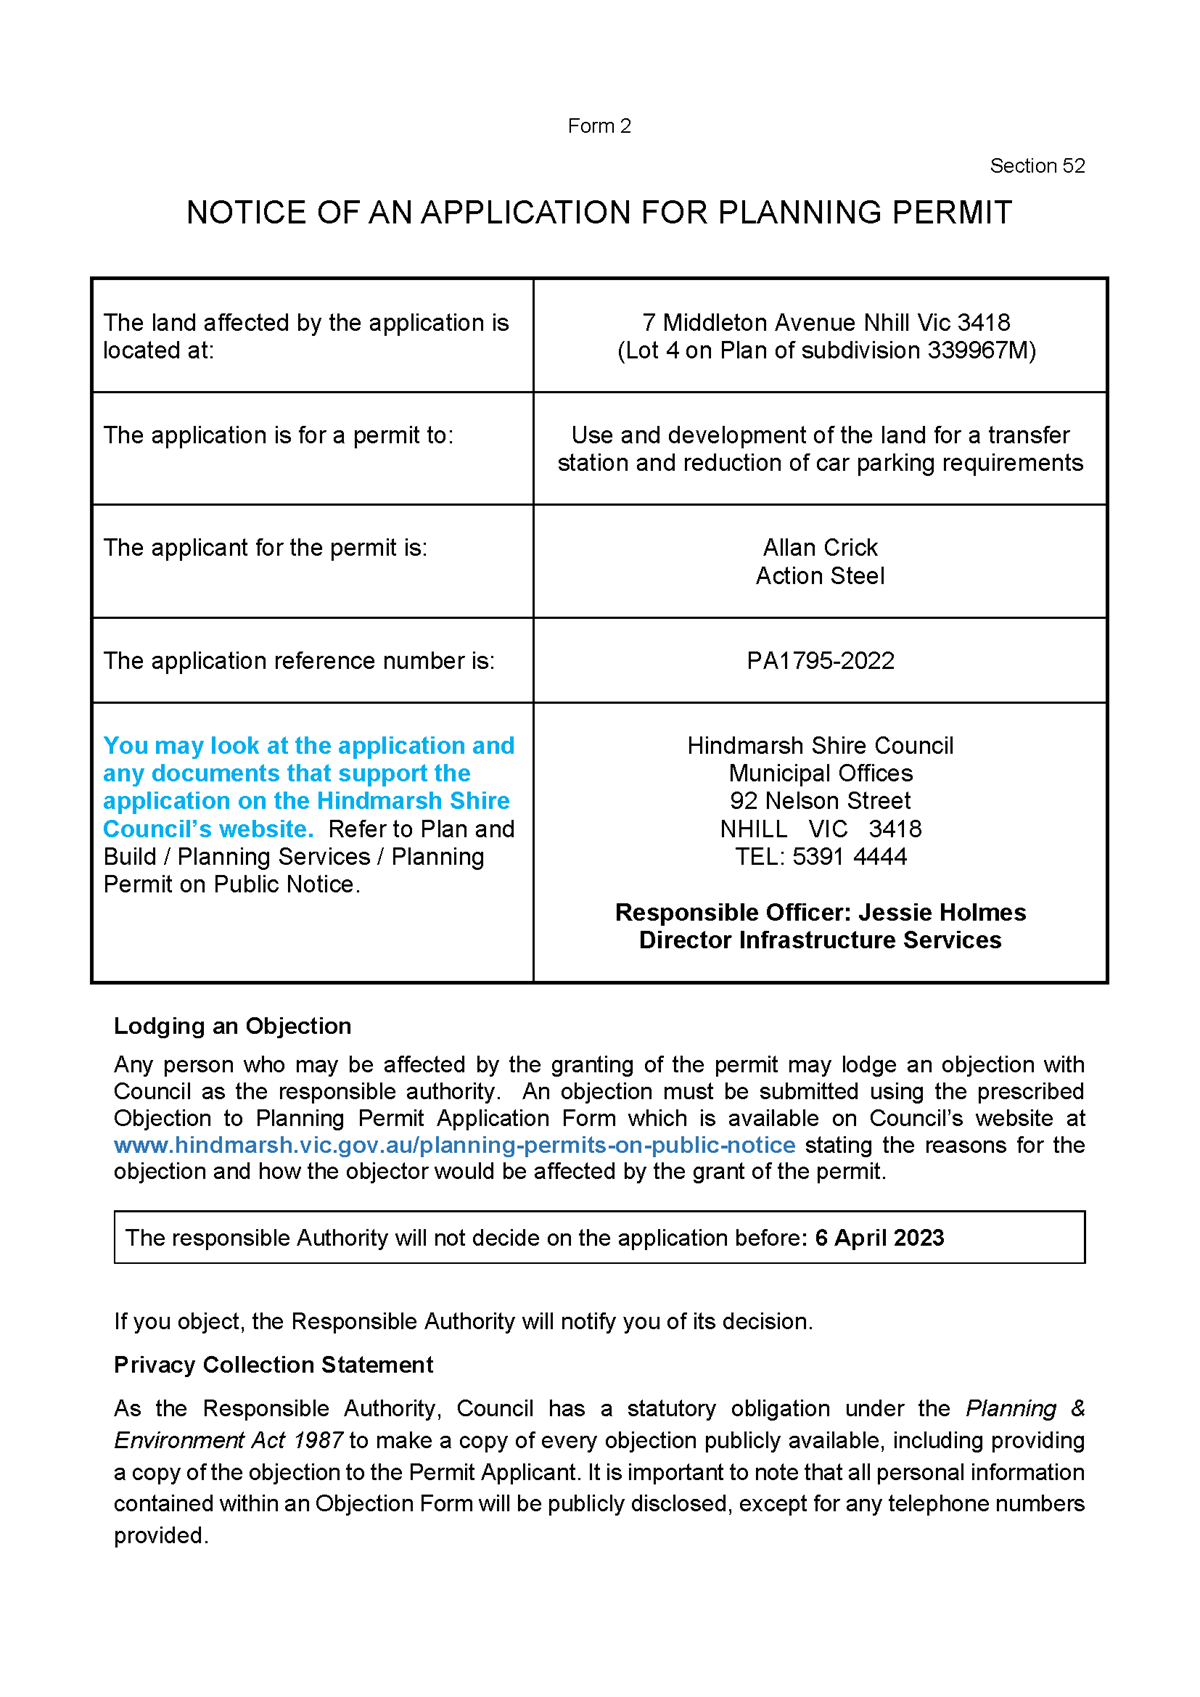 2023_03_22 - PA1795-2022 ADVERT - Form 2.png